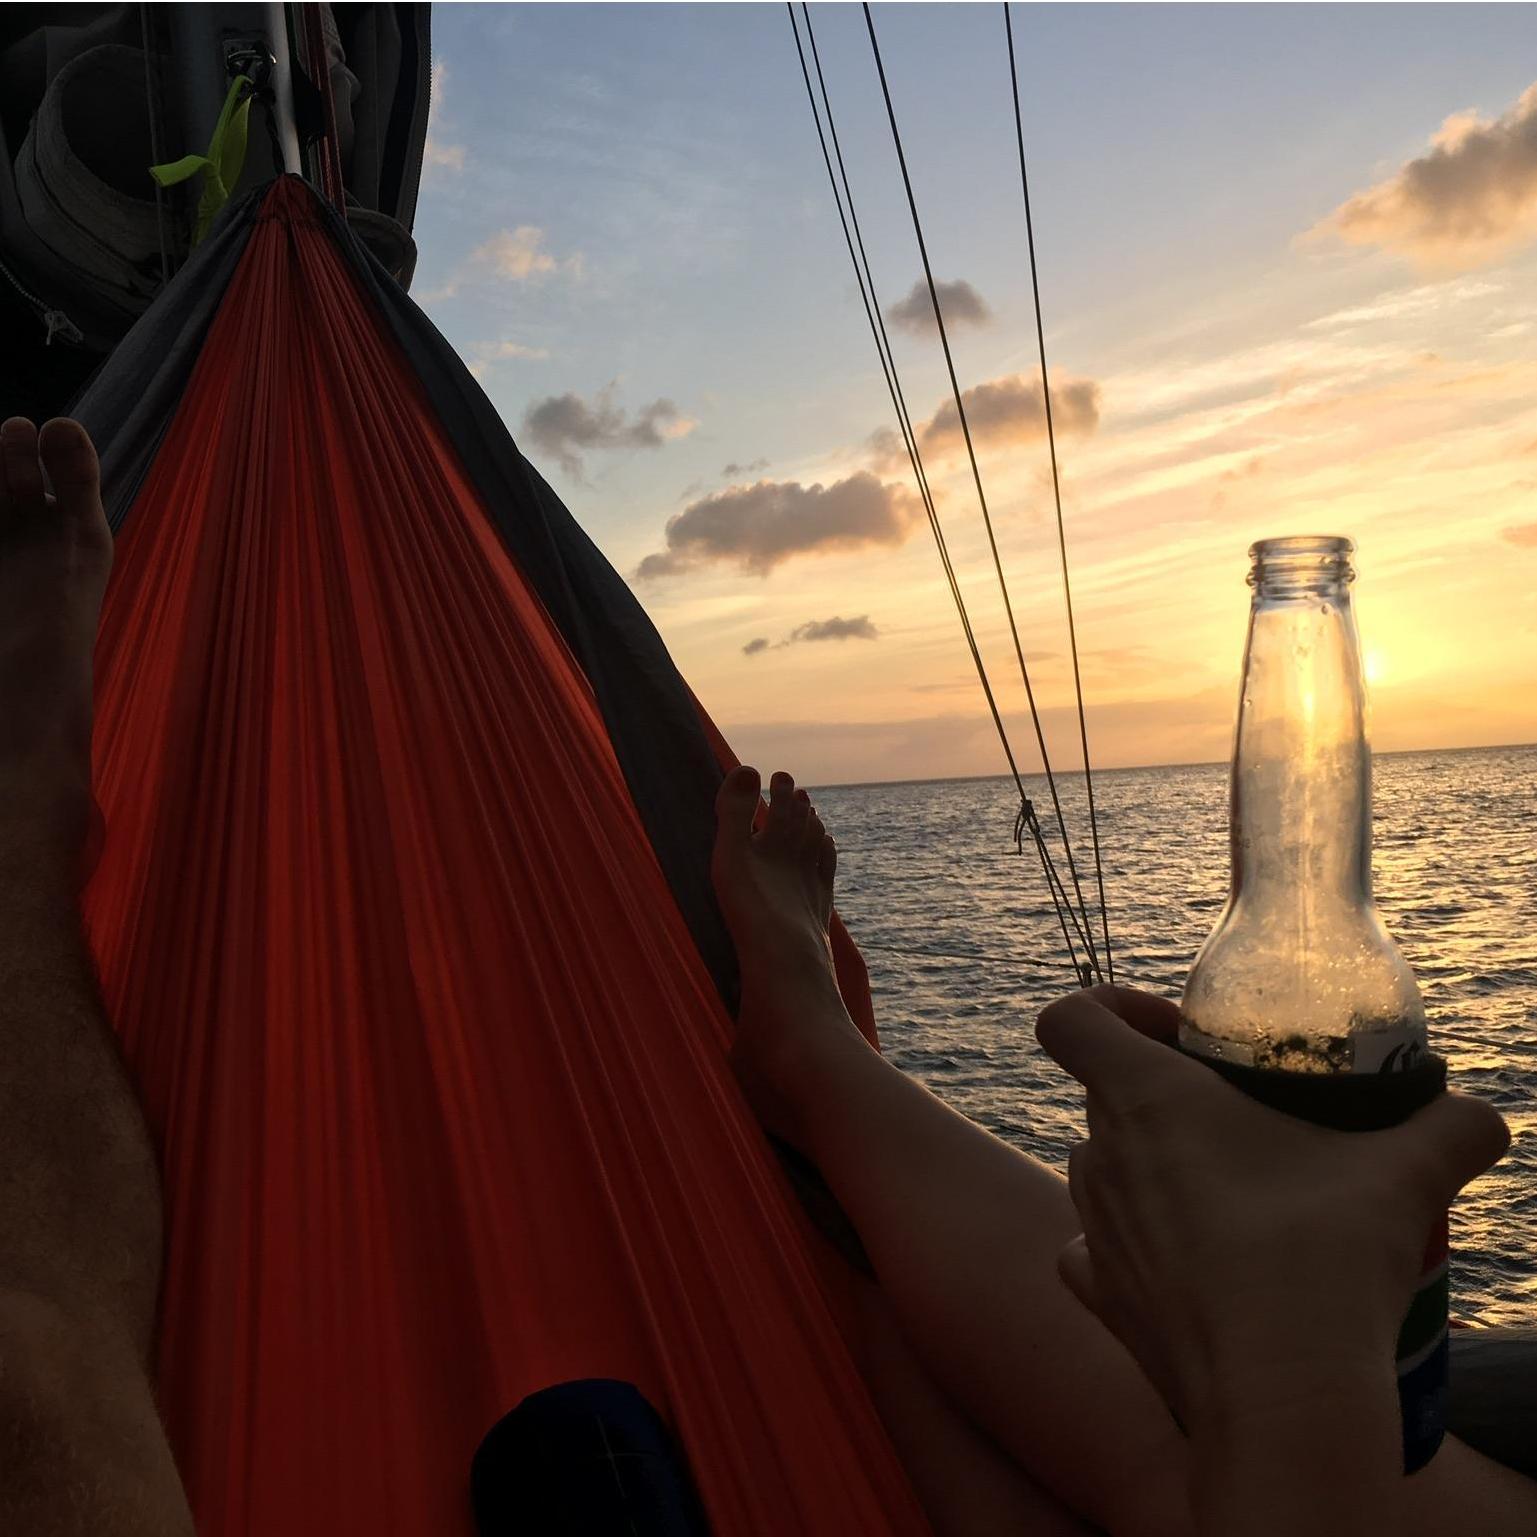 St. Lucia sunsets and hammock time.